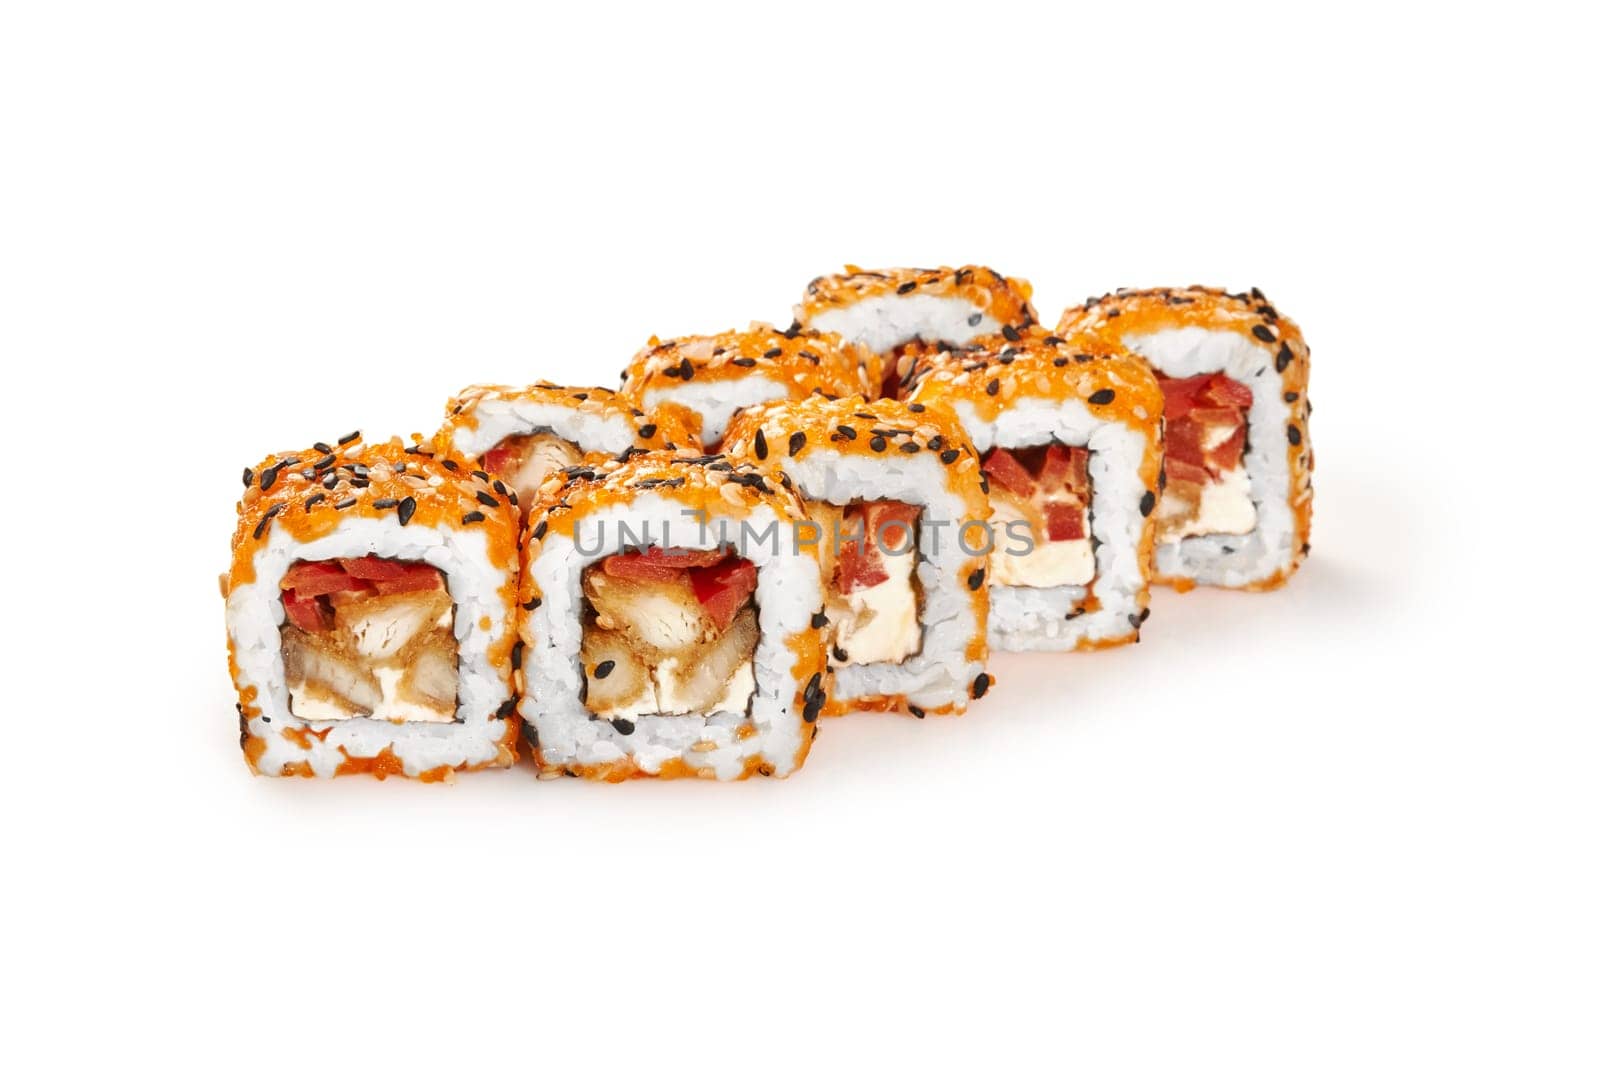 Chicken katsu sushi rolls with cream cheese and tomatoes, coated with tobiko roe and sesame seeds, presented isolated on white background. Traditional Japanese comfort food